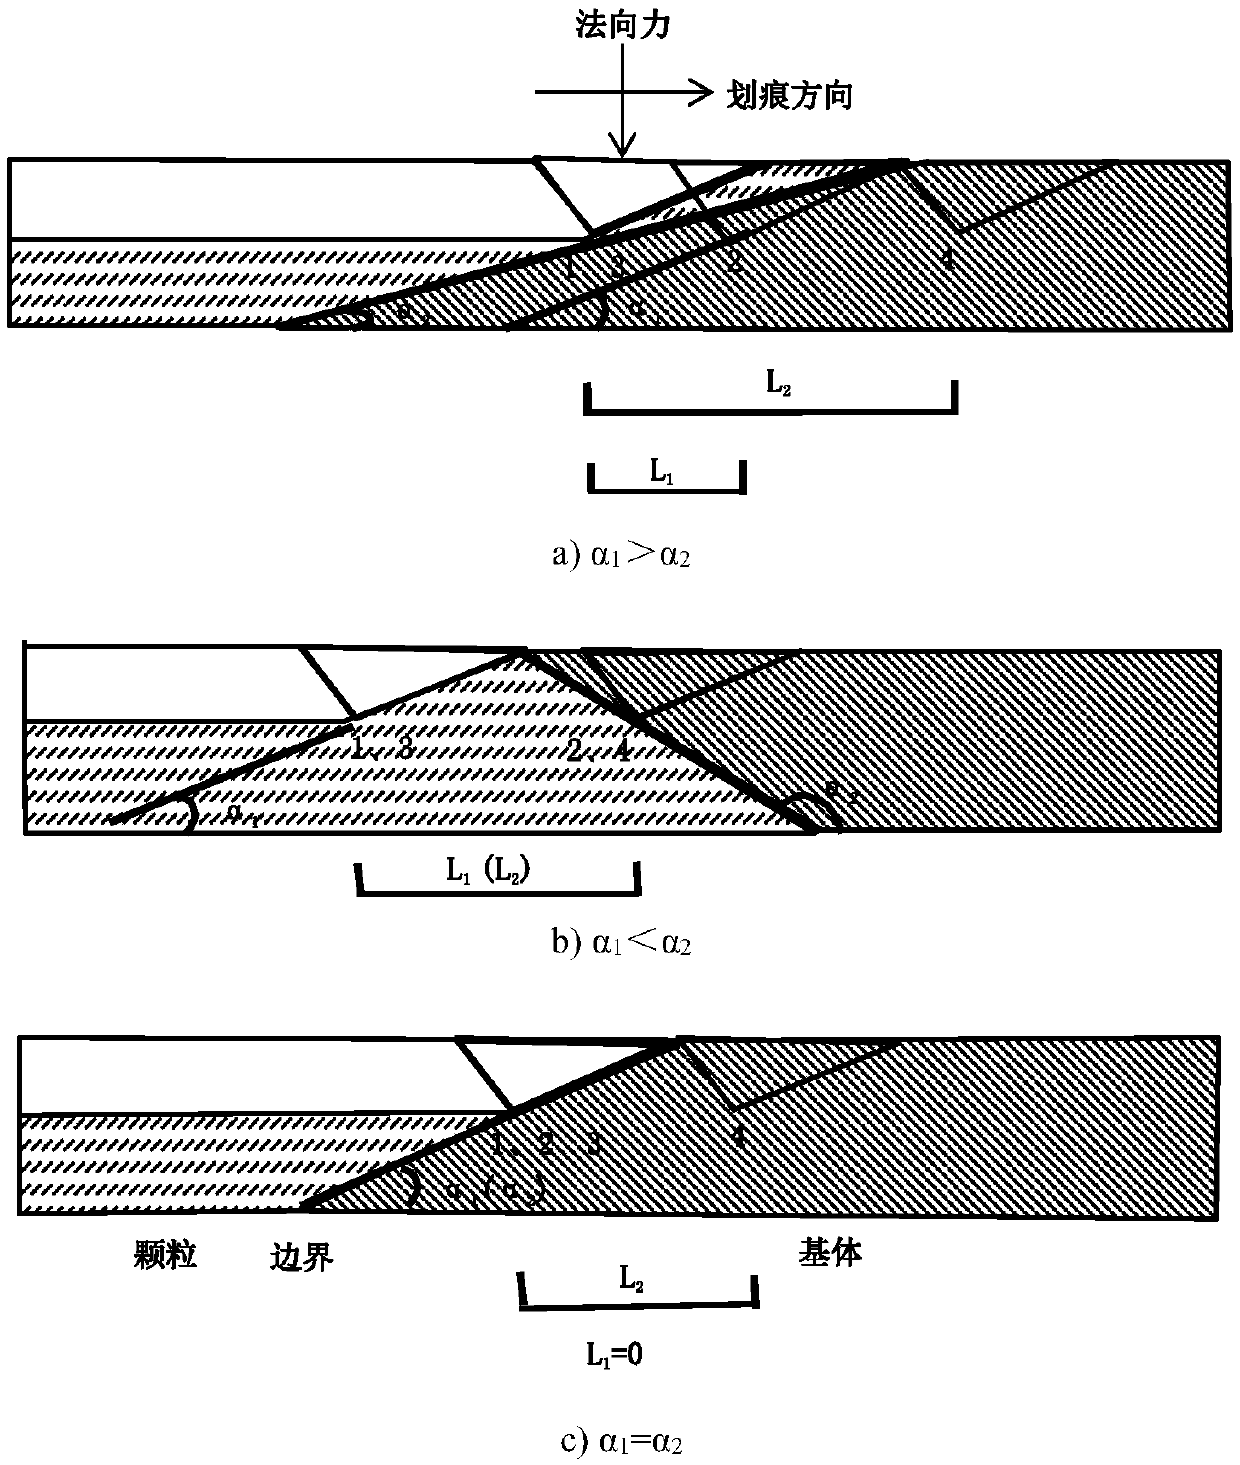 Method for in situ performance test of all components in particle reinforced composite material